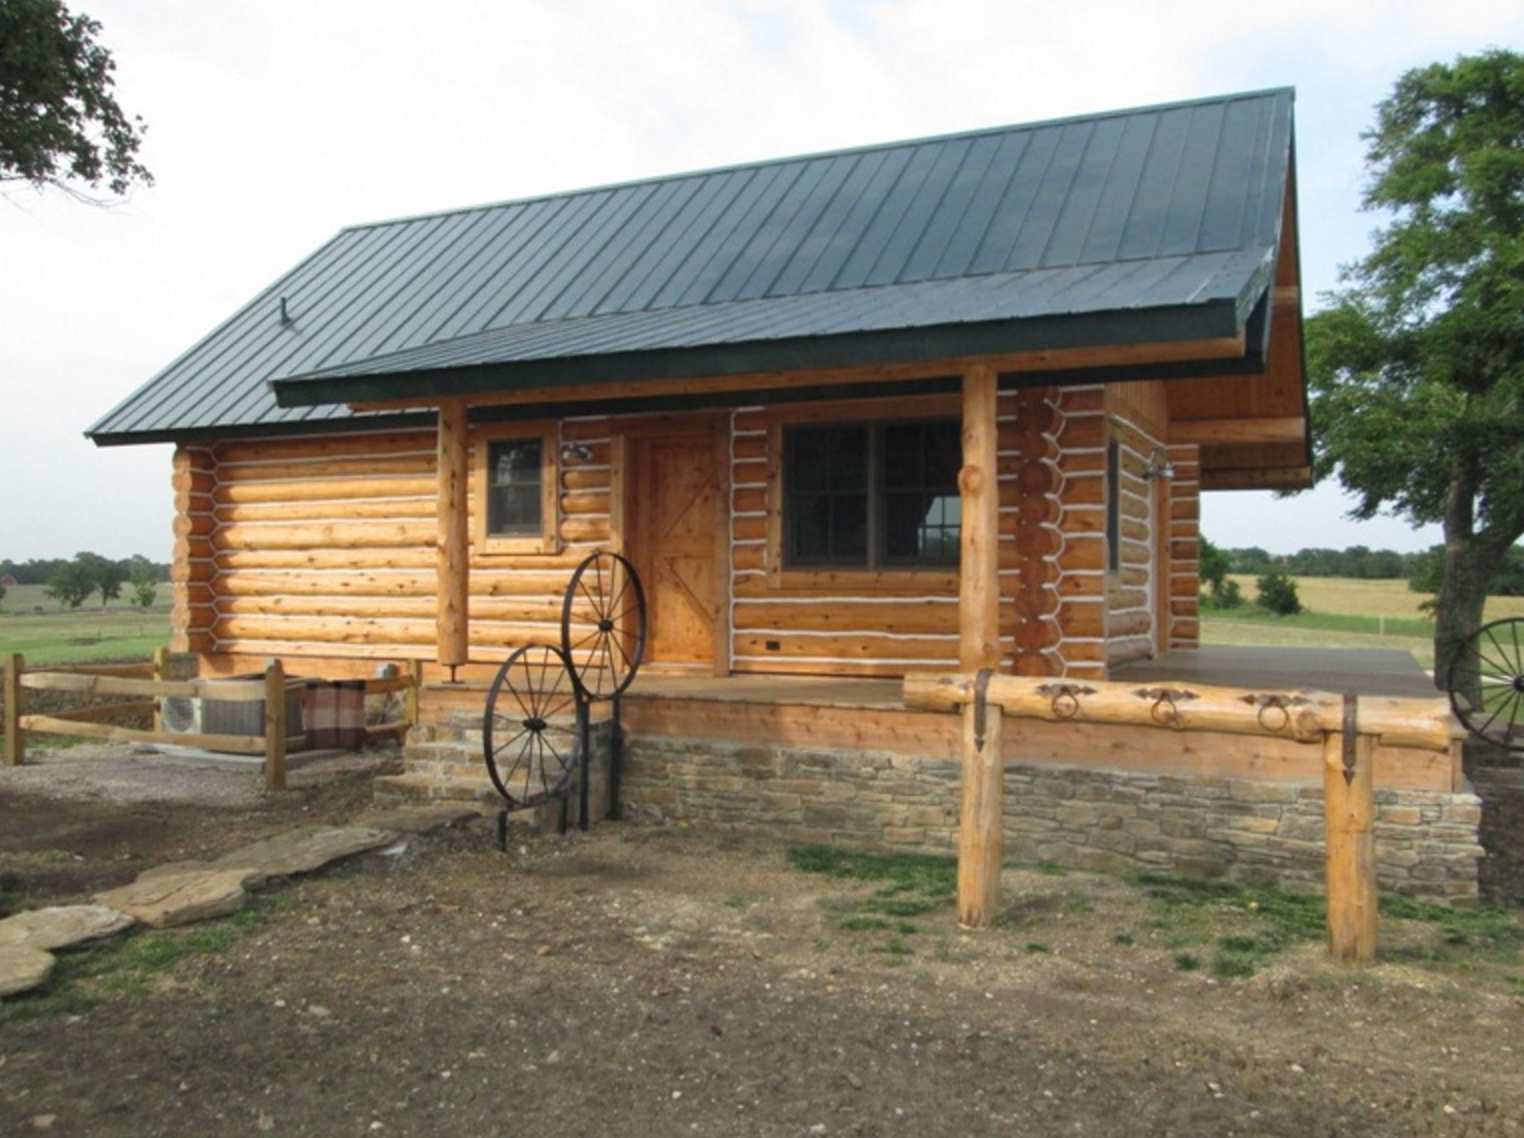 Exterior of log cabin with covered porch